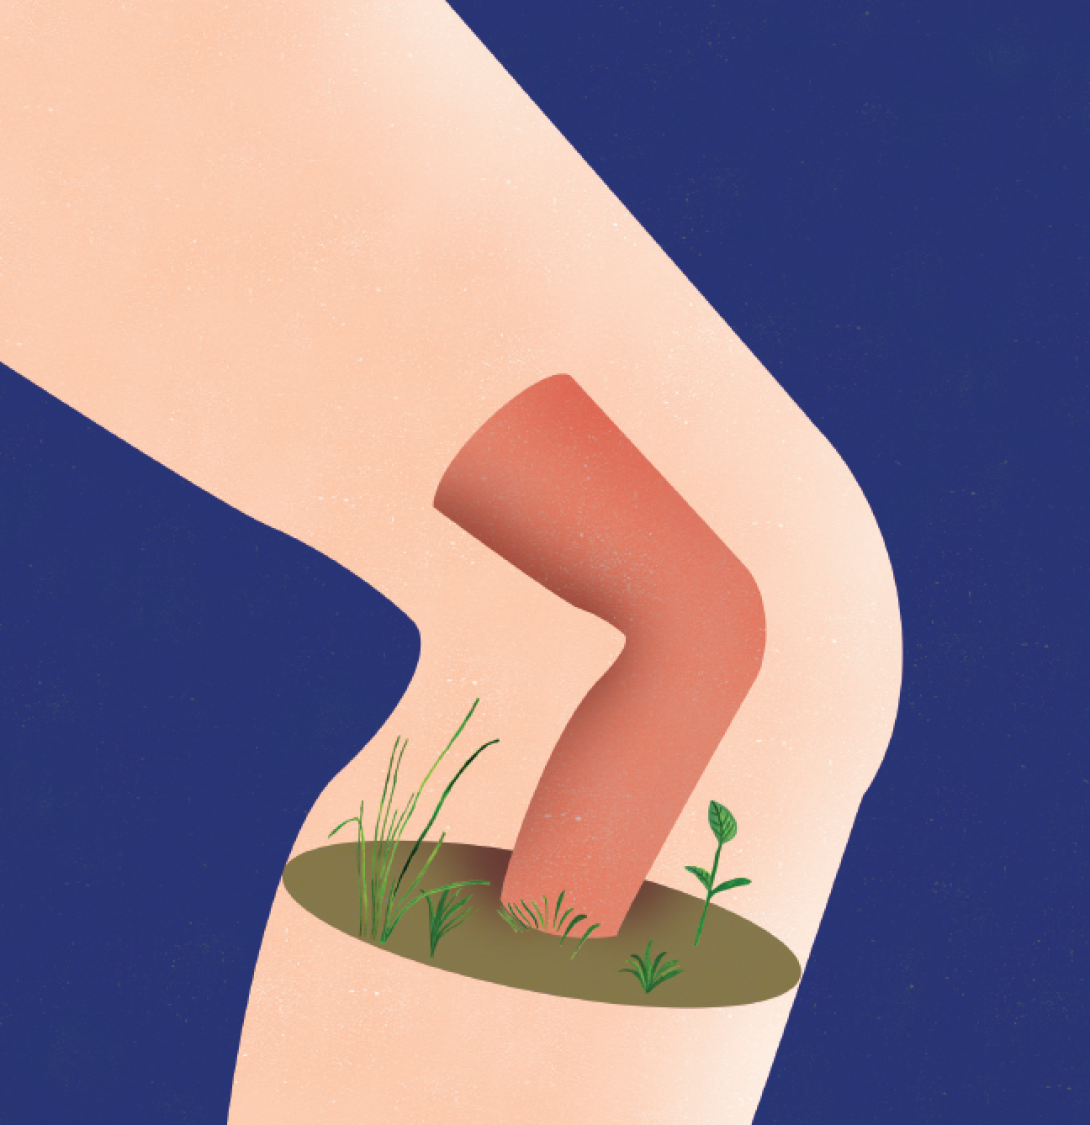 Illustration of a small knee growing inside another knee. The small knee is surrounded by tiny plants to indicate growth 